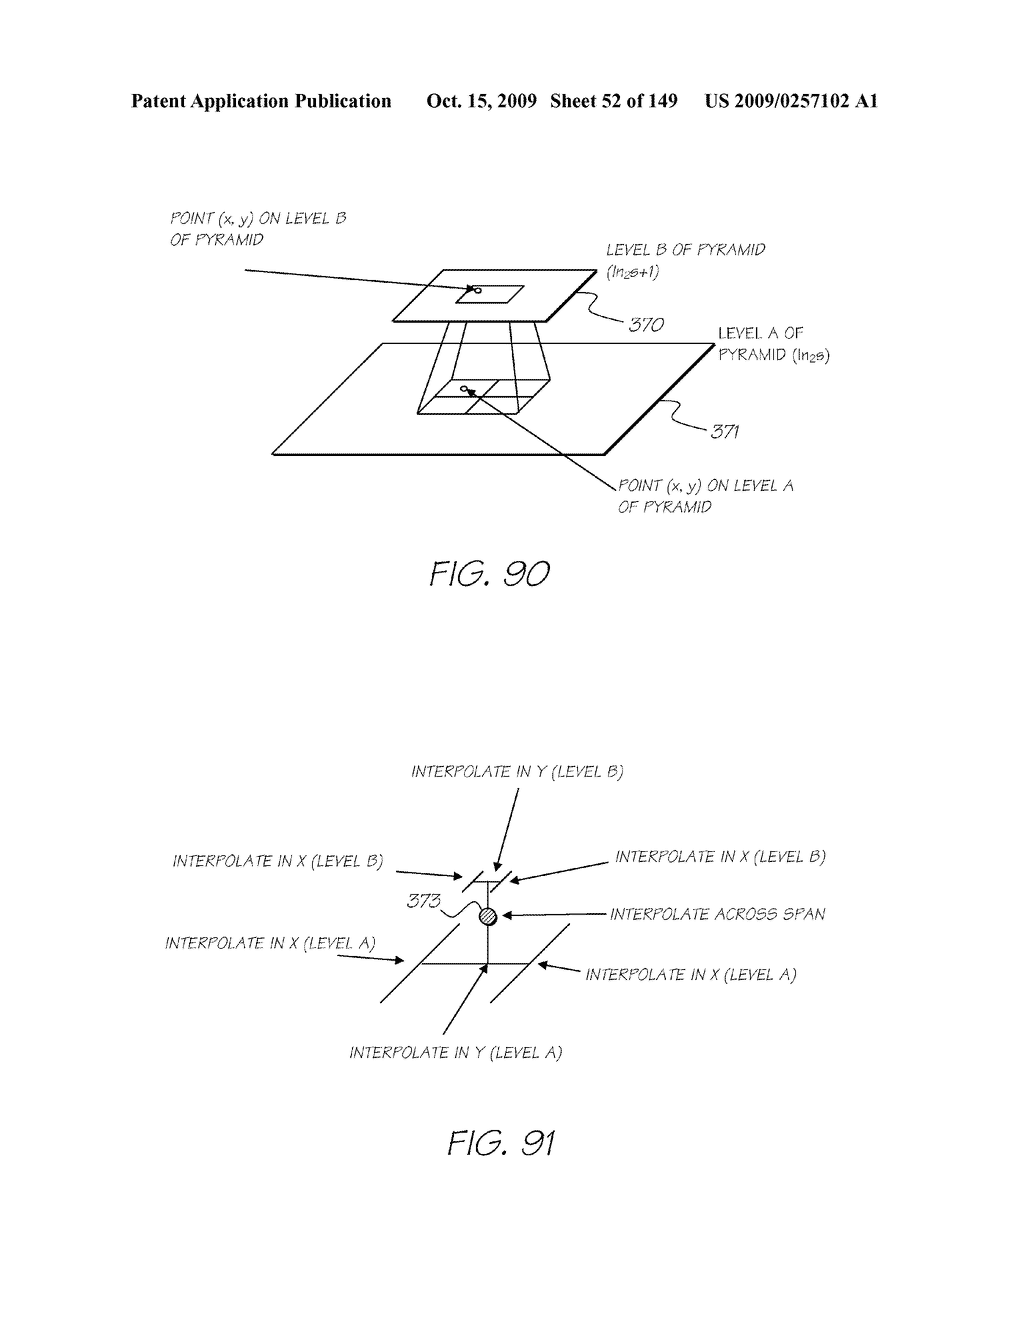 IMAGE PROCESSING APPARATUS HAVING CARD READER FOR APPLYING EFFECTS STORED ON A CARD TO A STORED IMAGE - diagram, schematic, and image 53